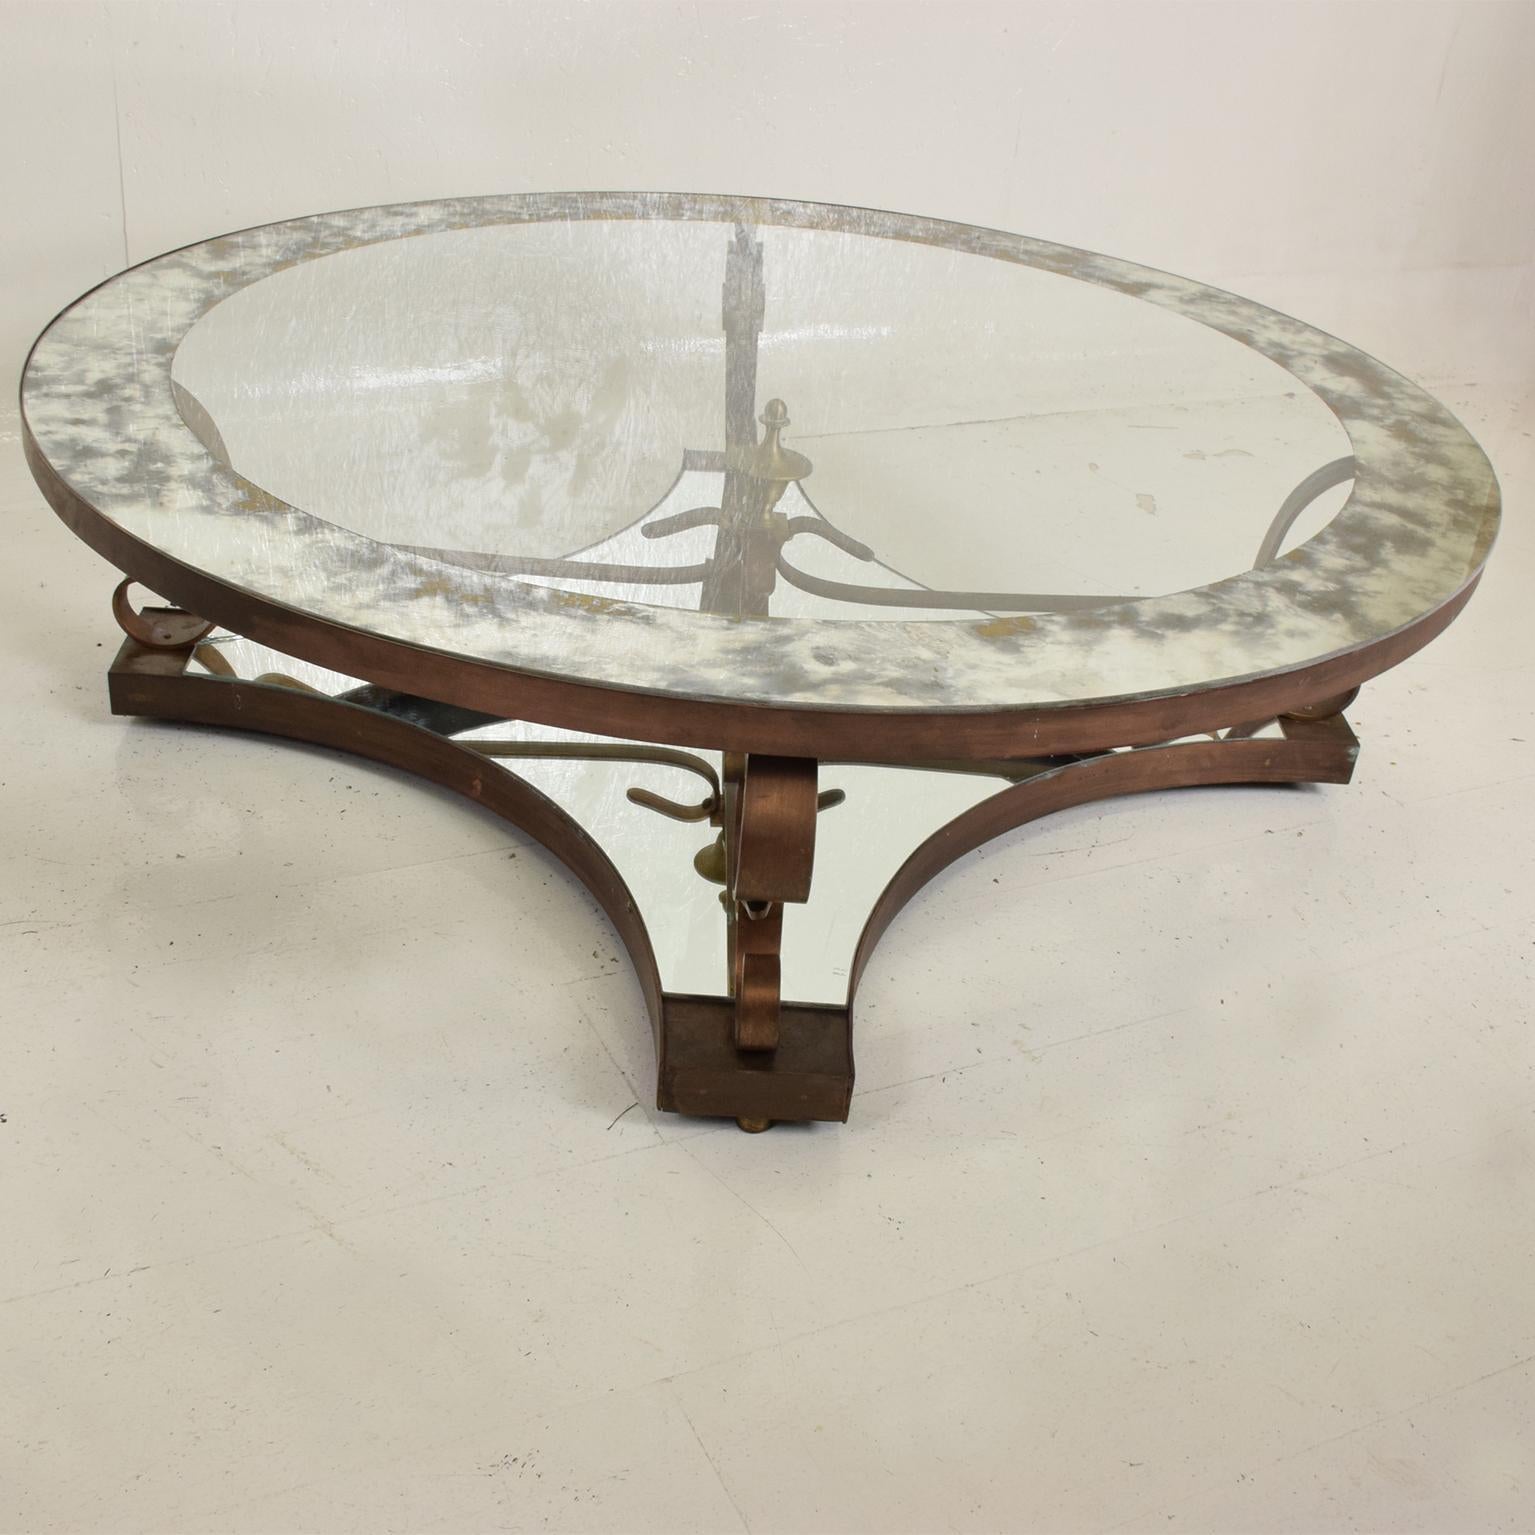 Patinated Midcentury Mexican Modernist Round Coffee Cocktail Table by Arturo Pani